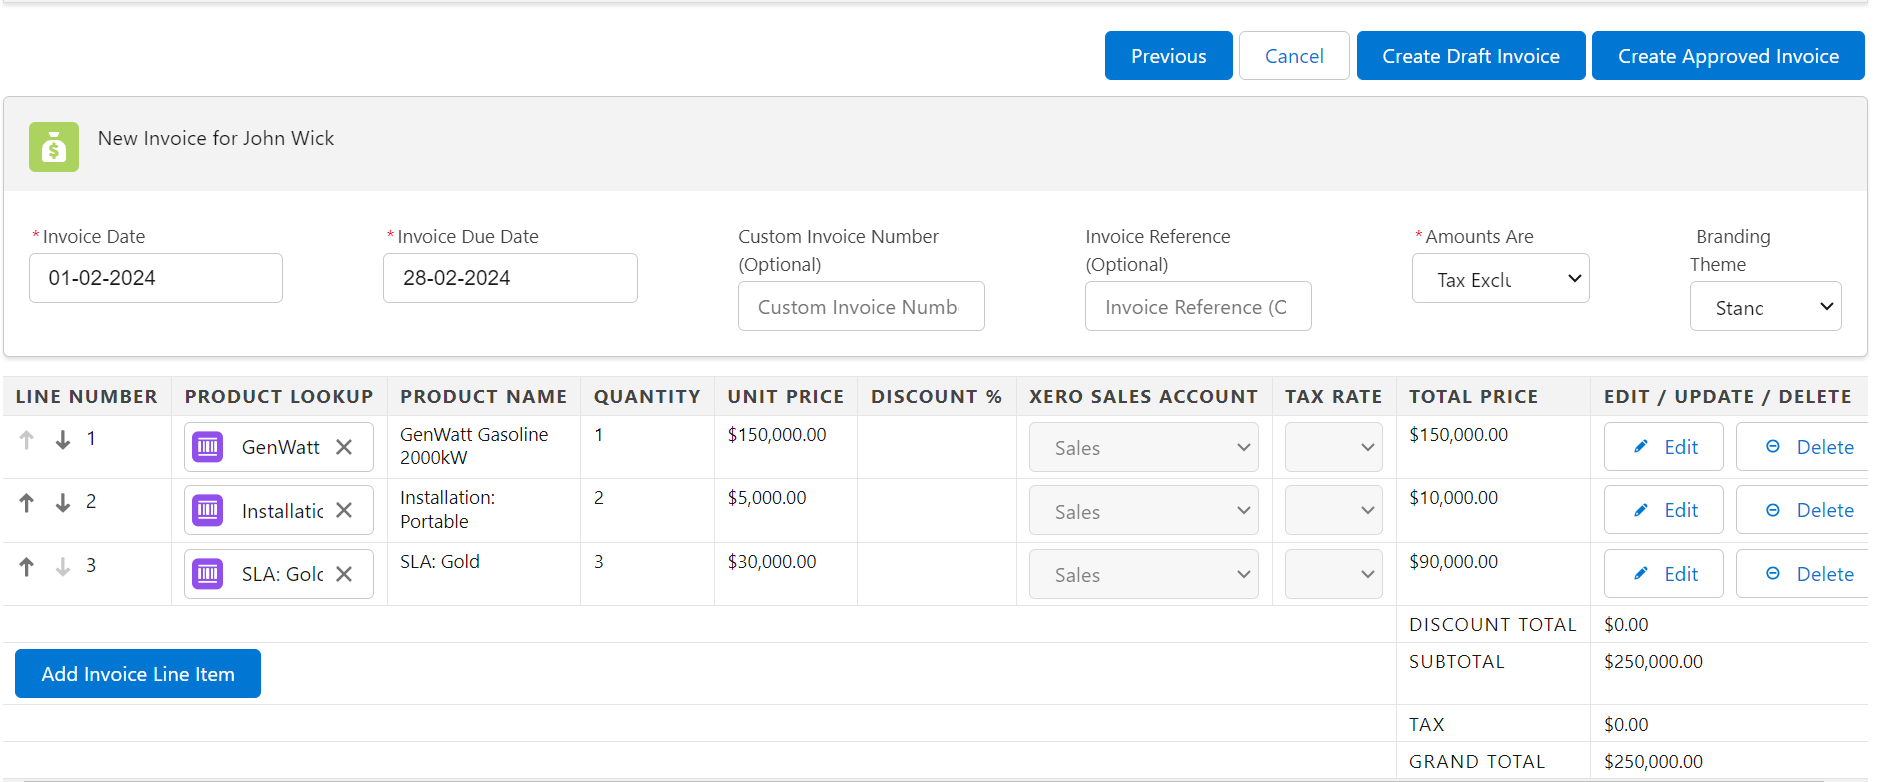 Create Draft Invoice Using Opportunity Products